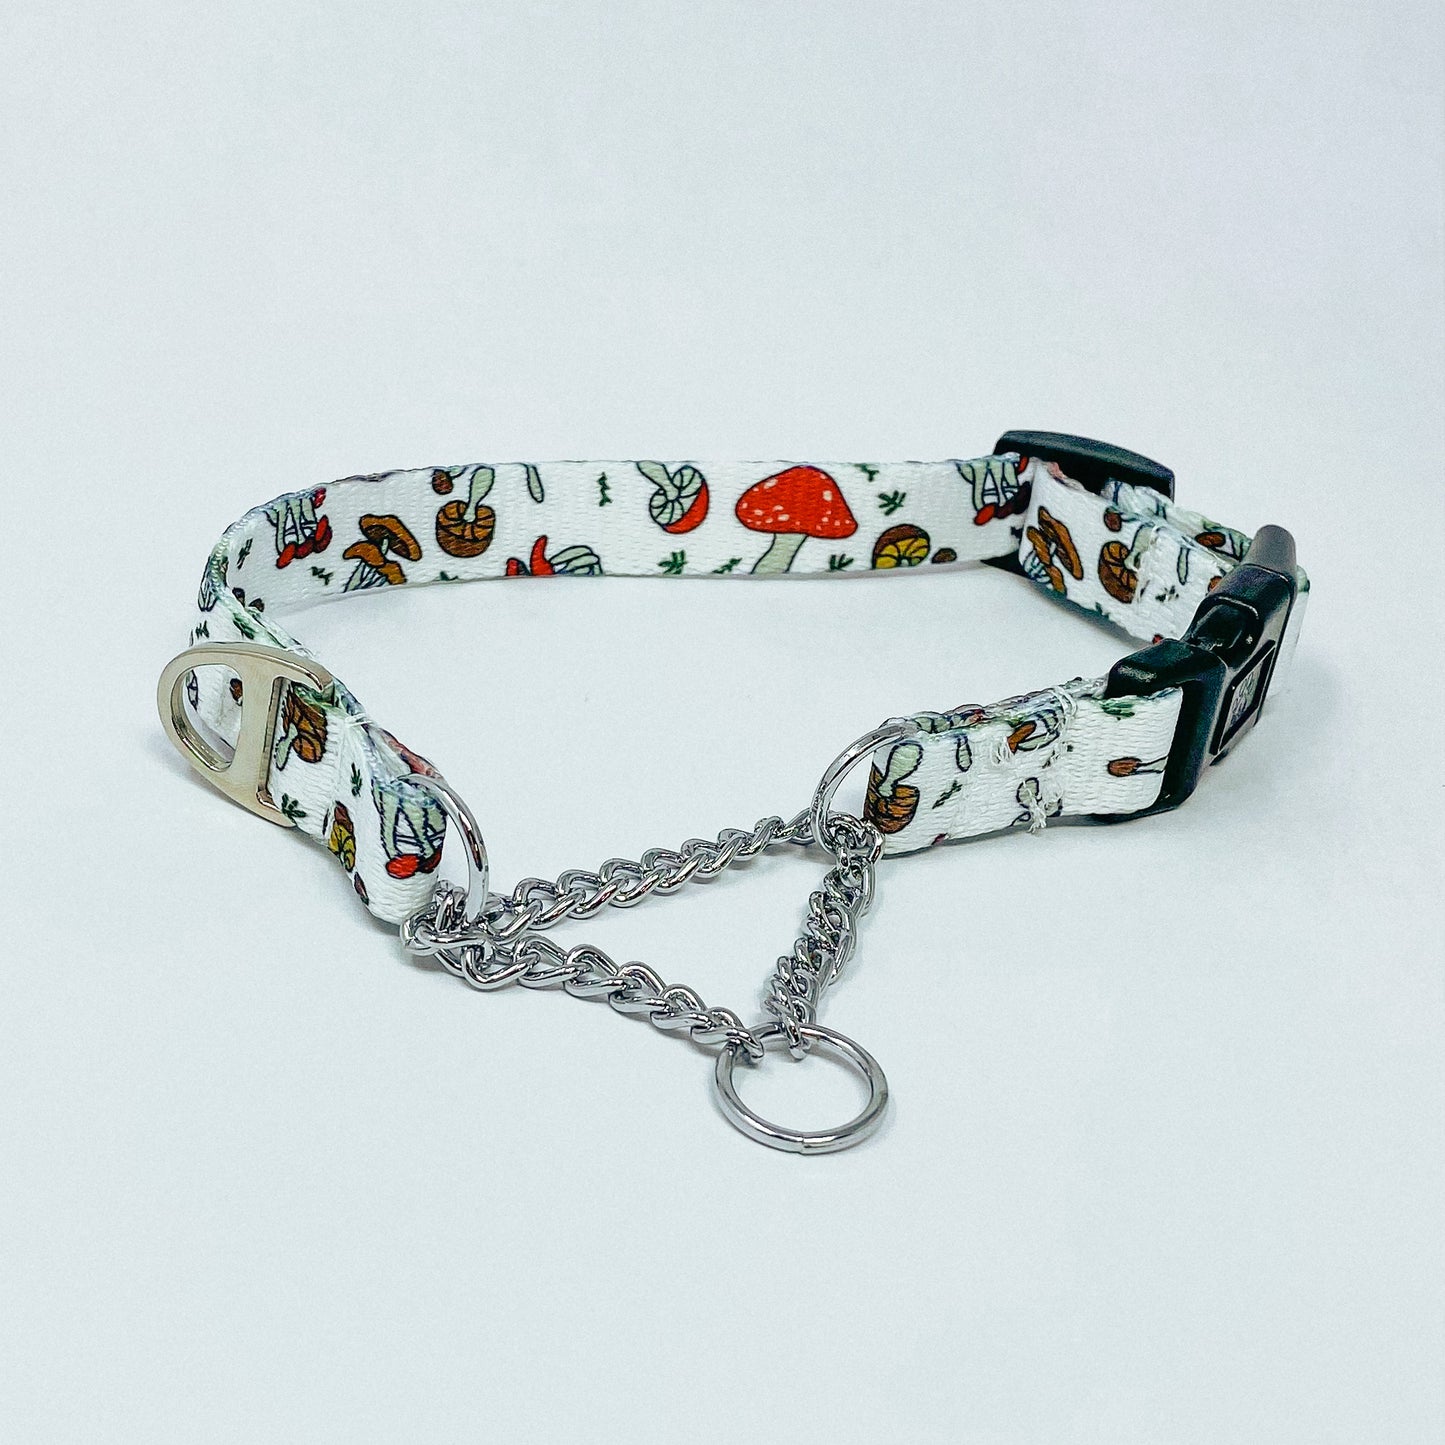 Fun-guy Recycled Martingale Dog Collar